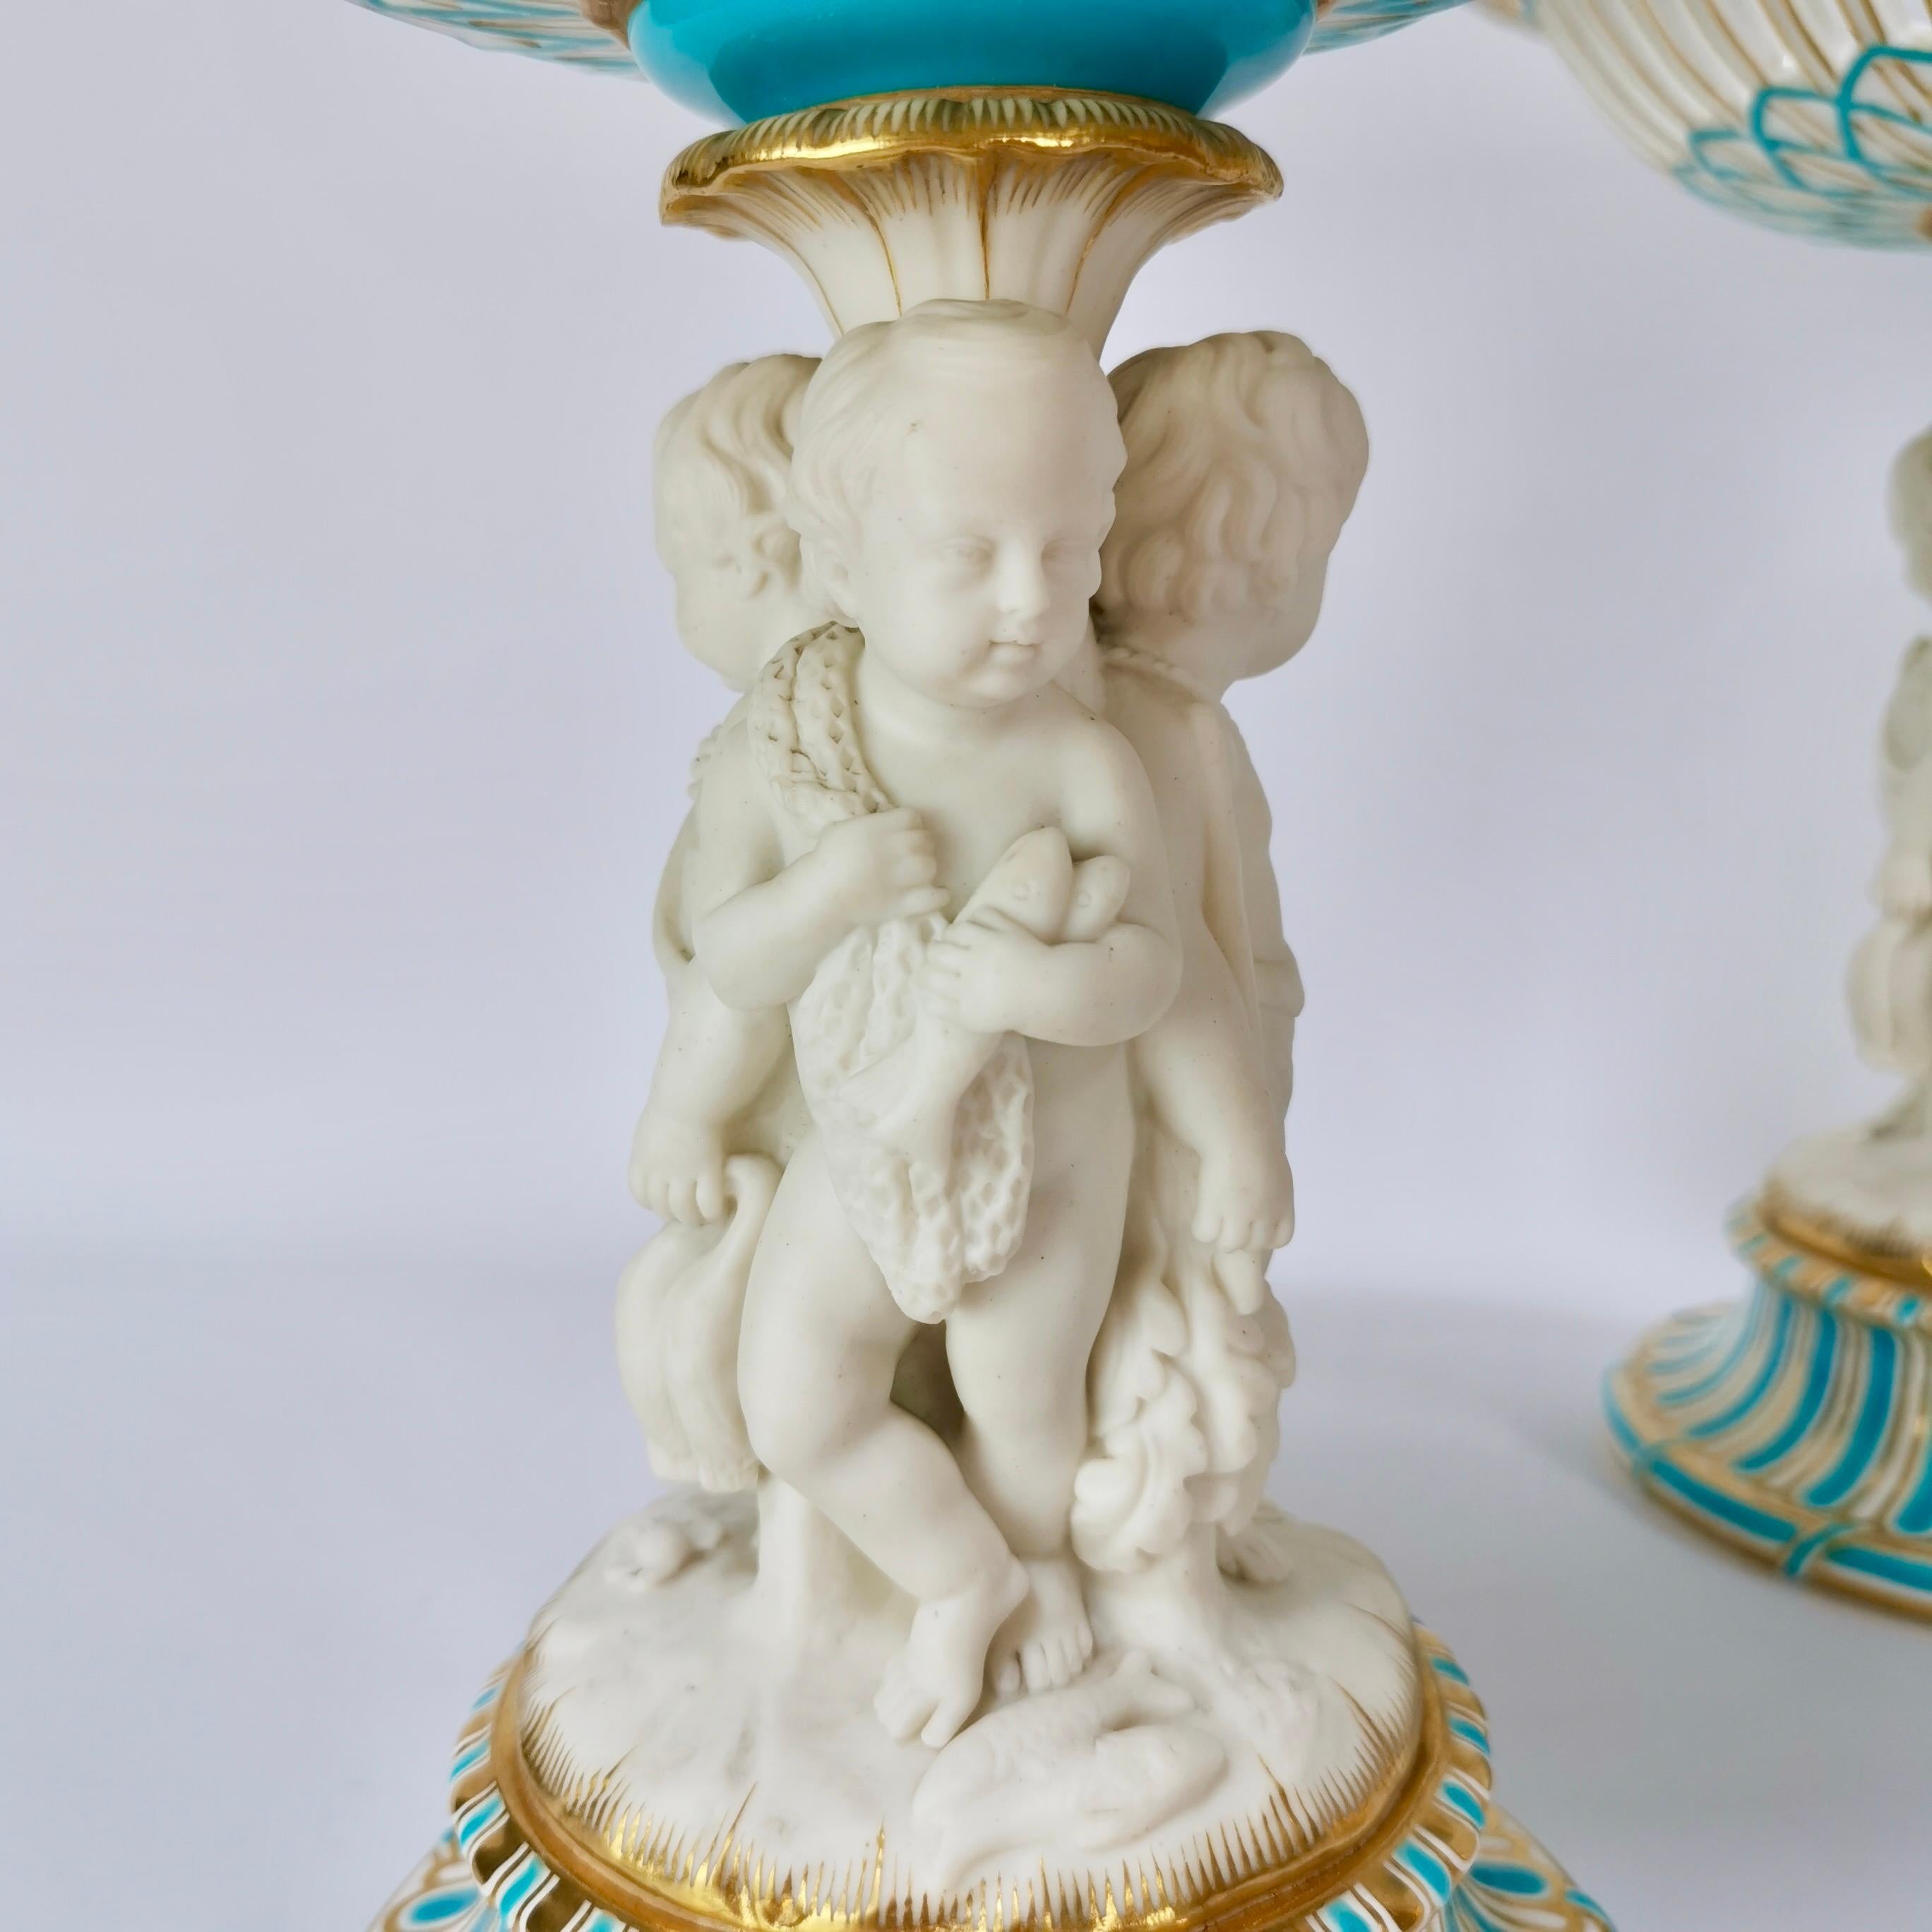 Minton Pair of Tazzas, White Parian Porcelain Cherubs Hunting, Victorian ca 1880 In Good Condition For Sale In London, GB